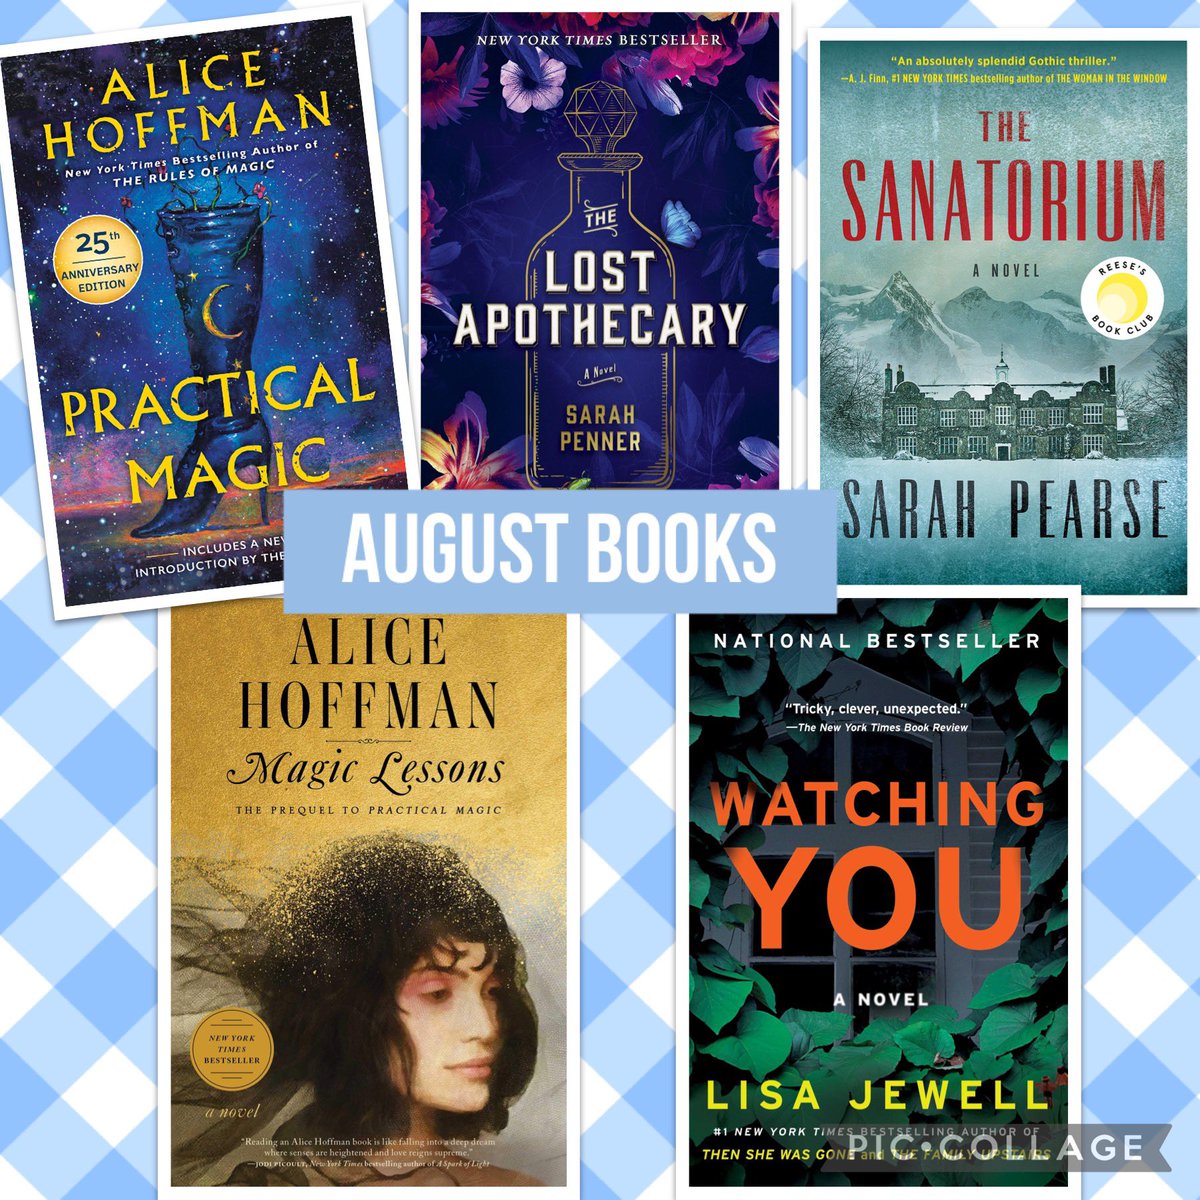 I can go anywhere, I can be anyone, I can do anything because I can read! 

My reads this month. I had some amazing escapes and adventures with my books. 

Reading. It’s radical! 

#svvsdreads #magiceverywhere #mysteryfever #mysteryandmagic